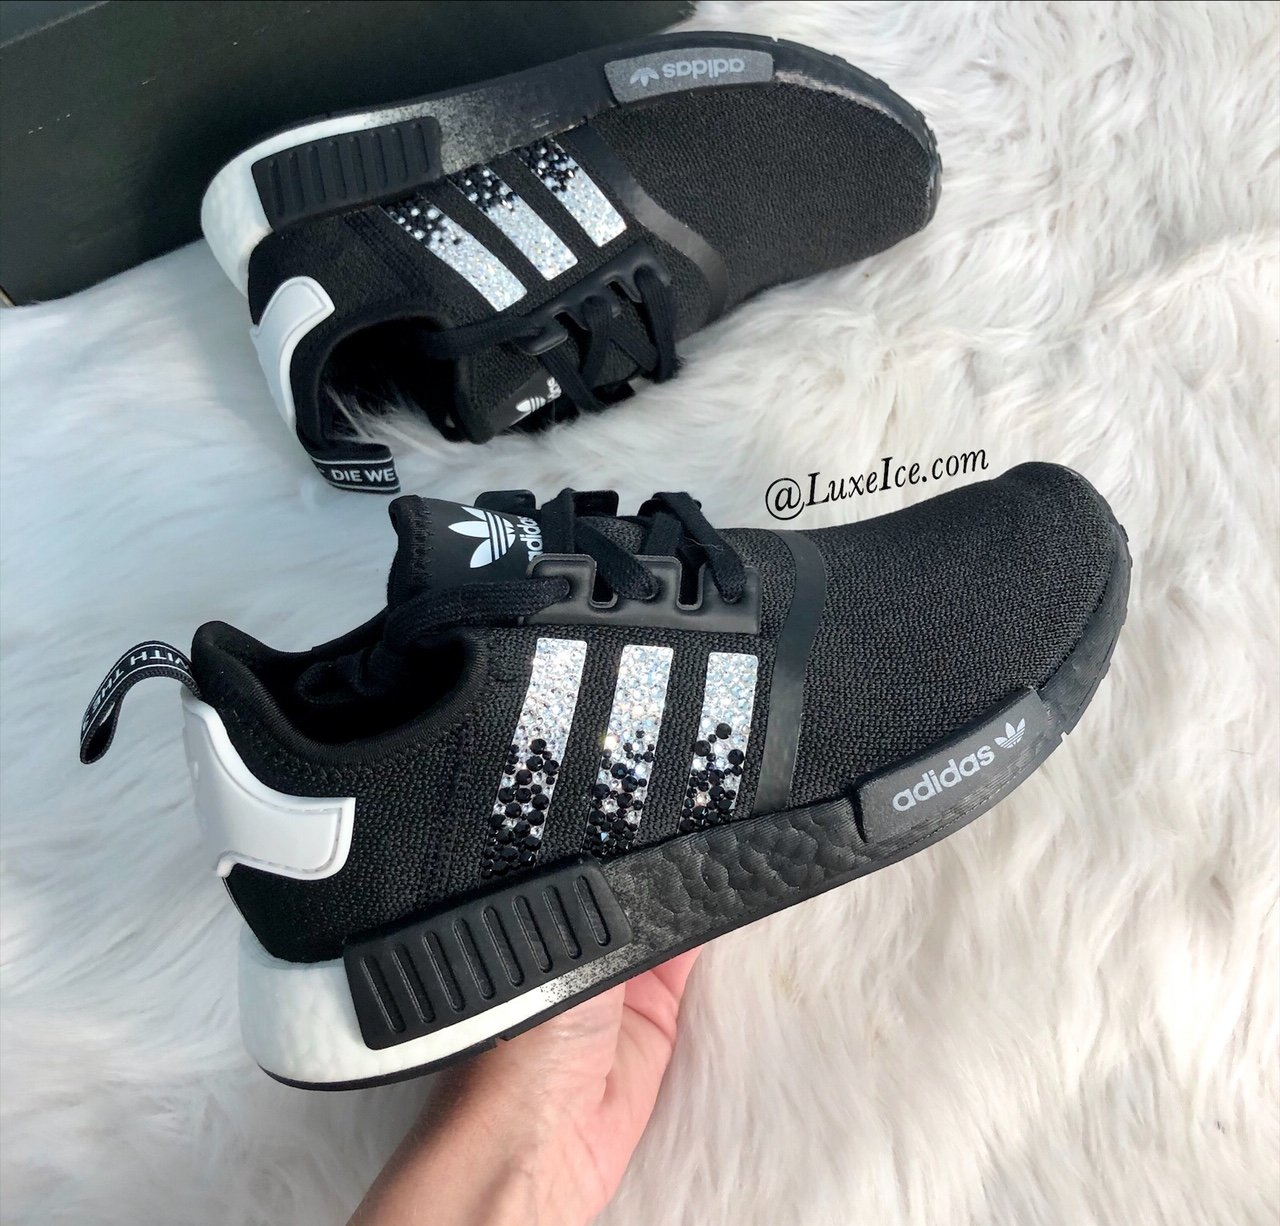 men's adidas nmd runner r1 casual shoes black